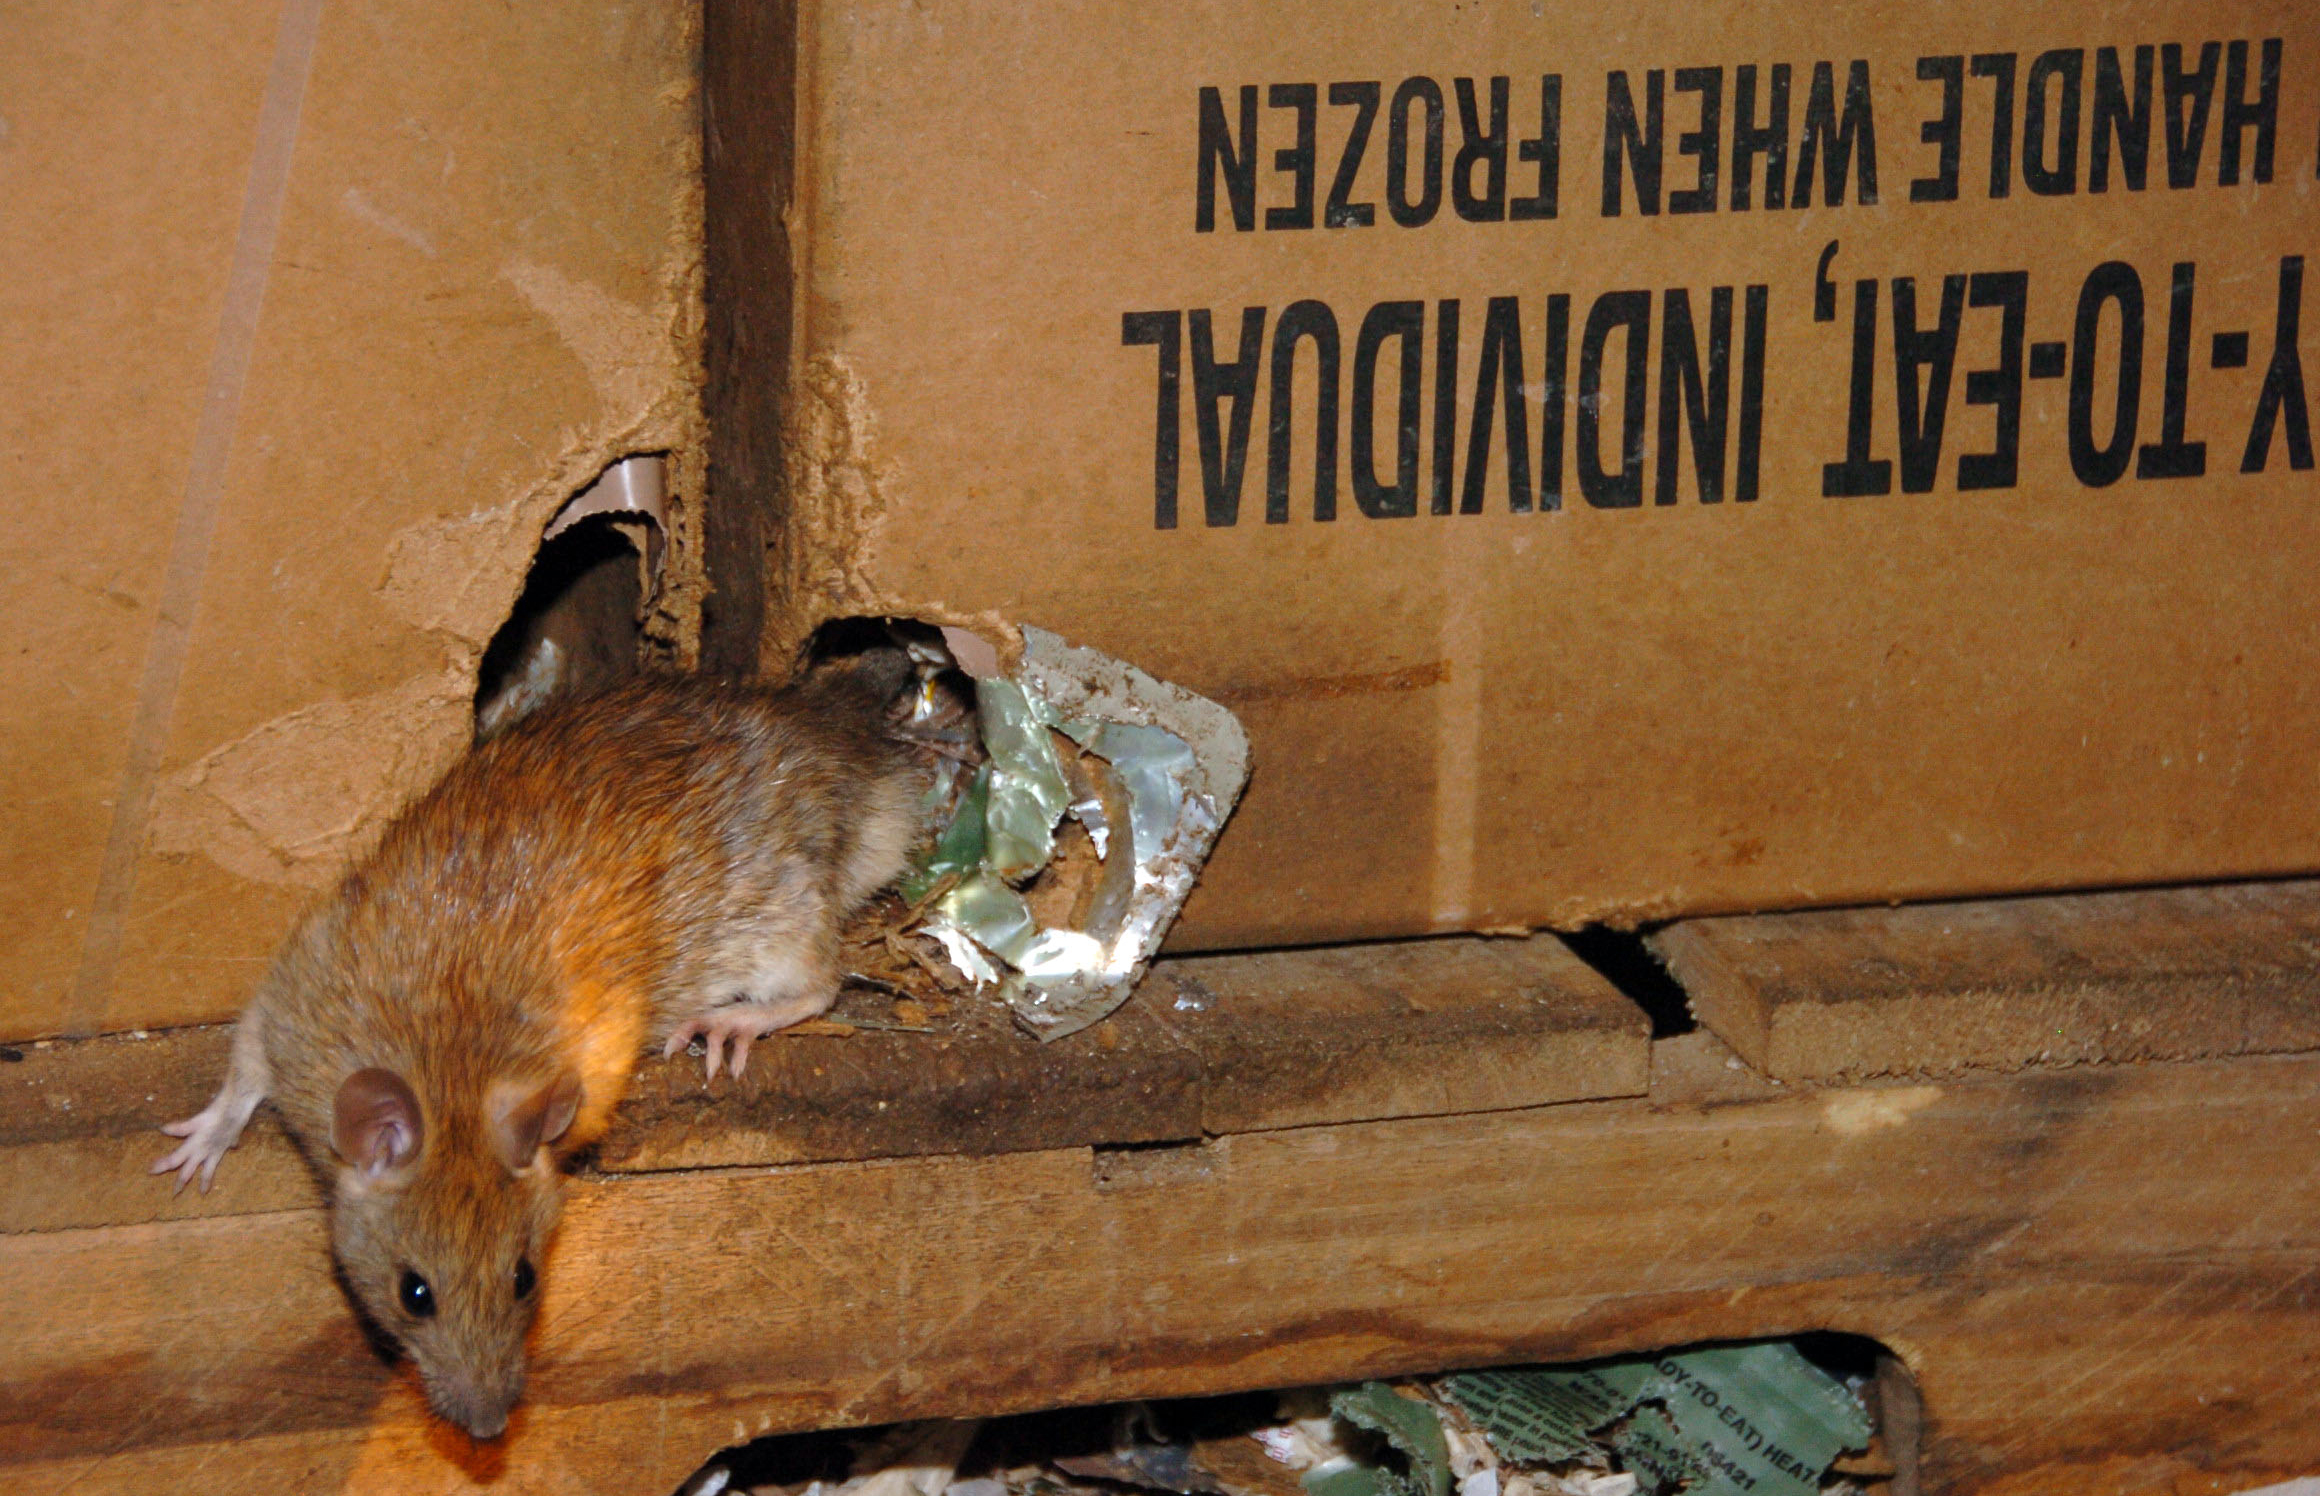 Rodent chewing through inside of box